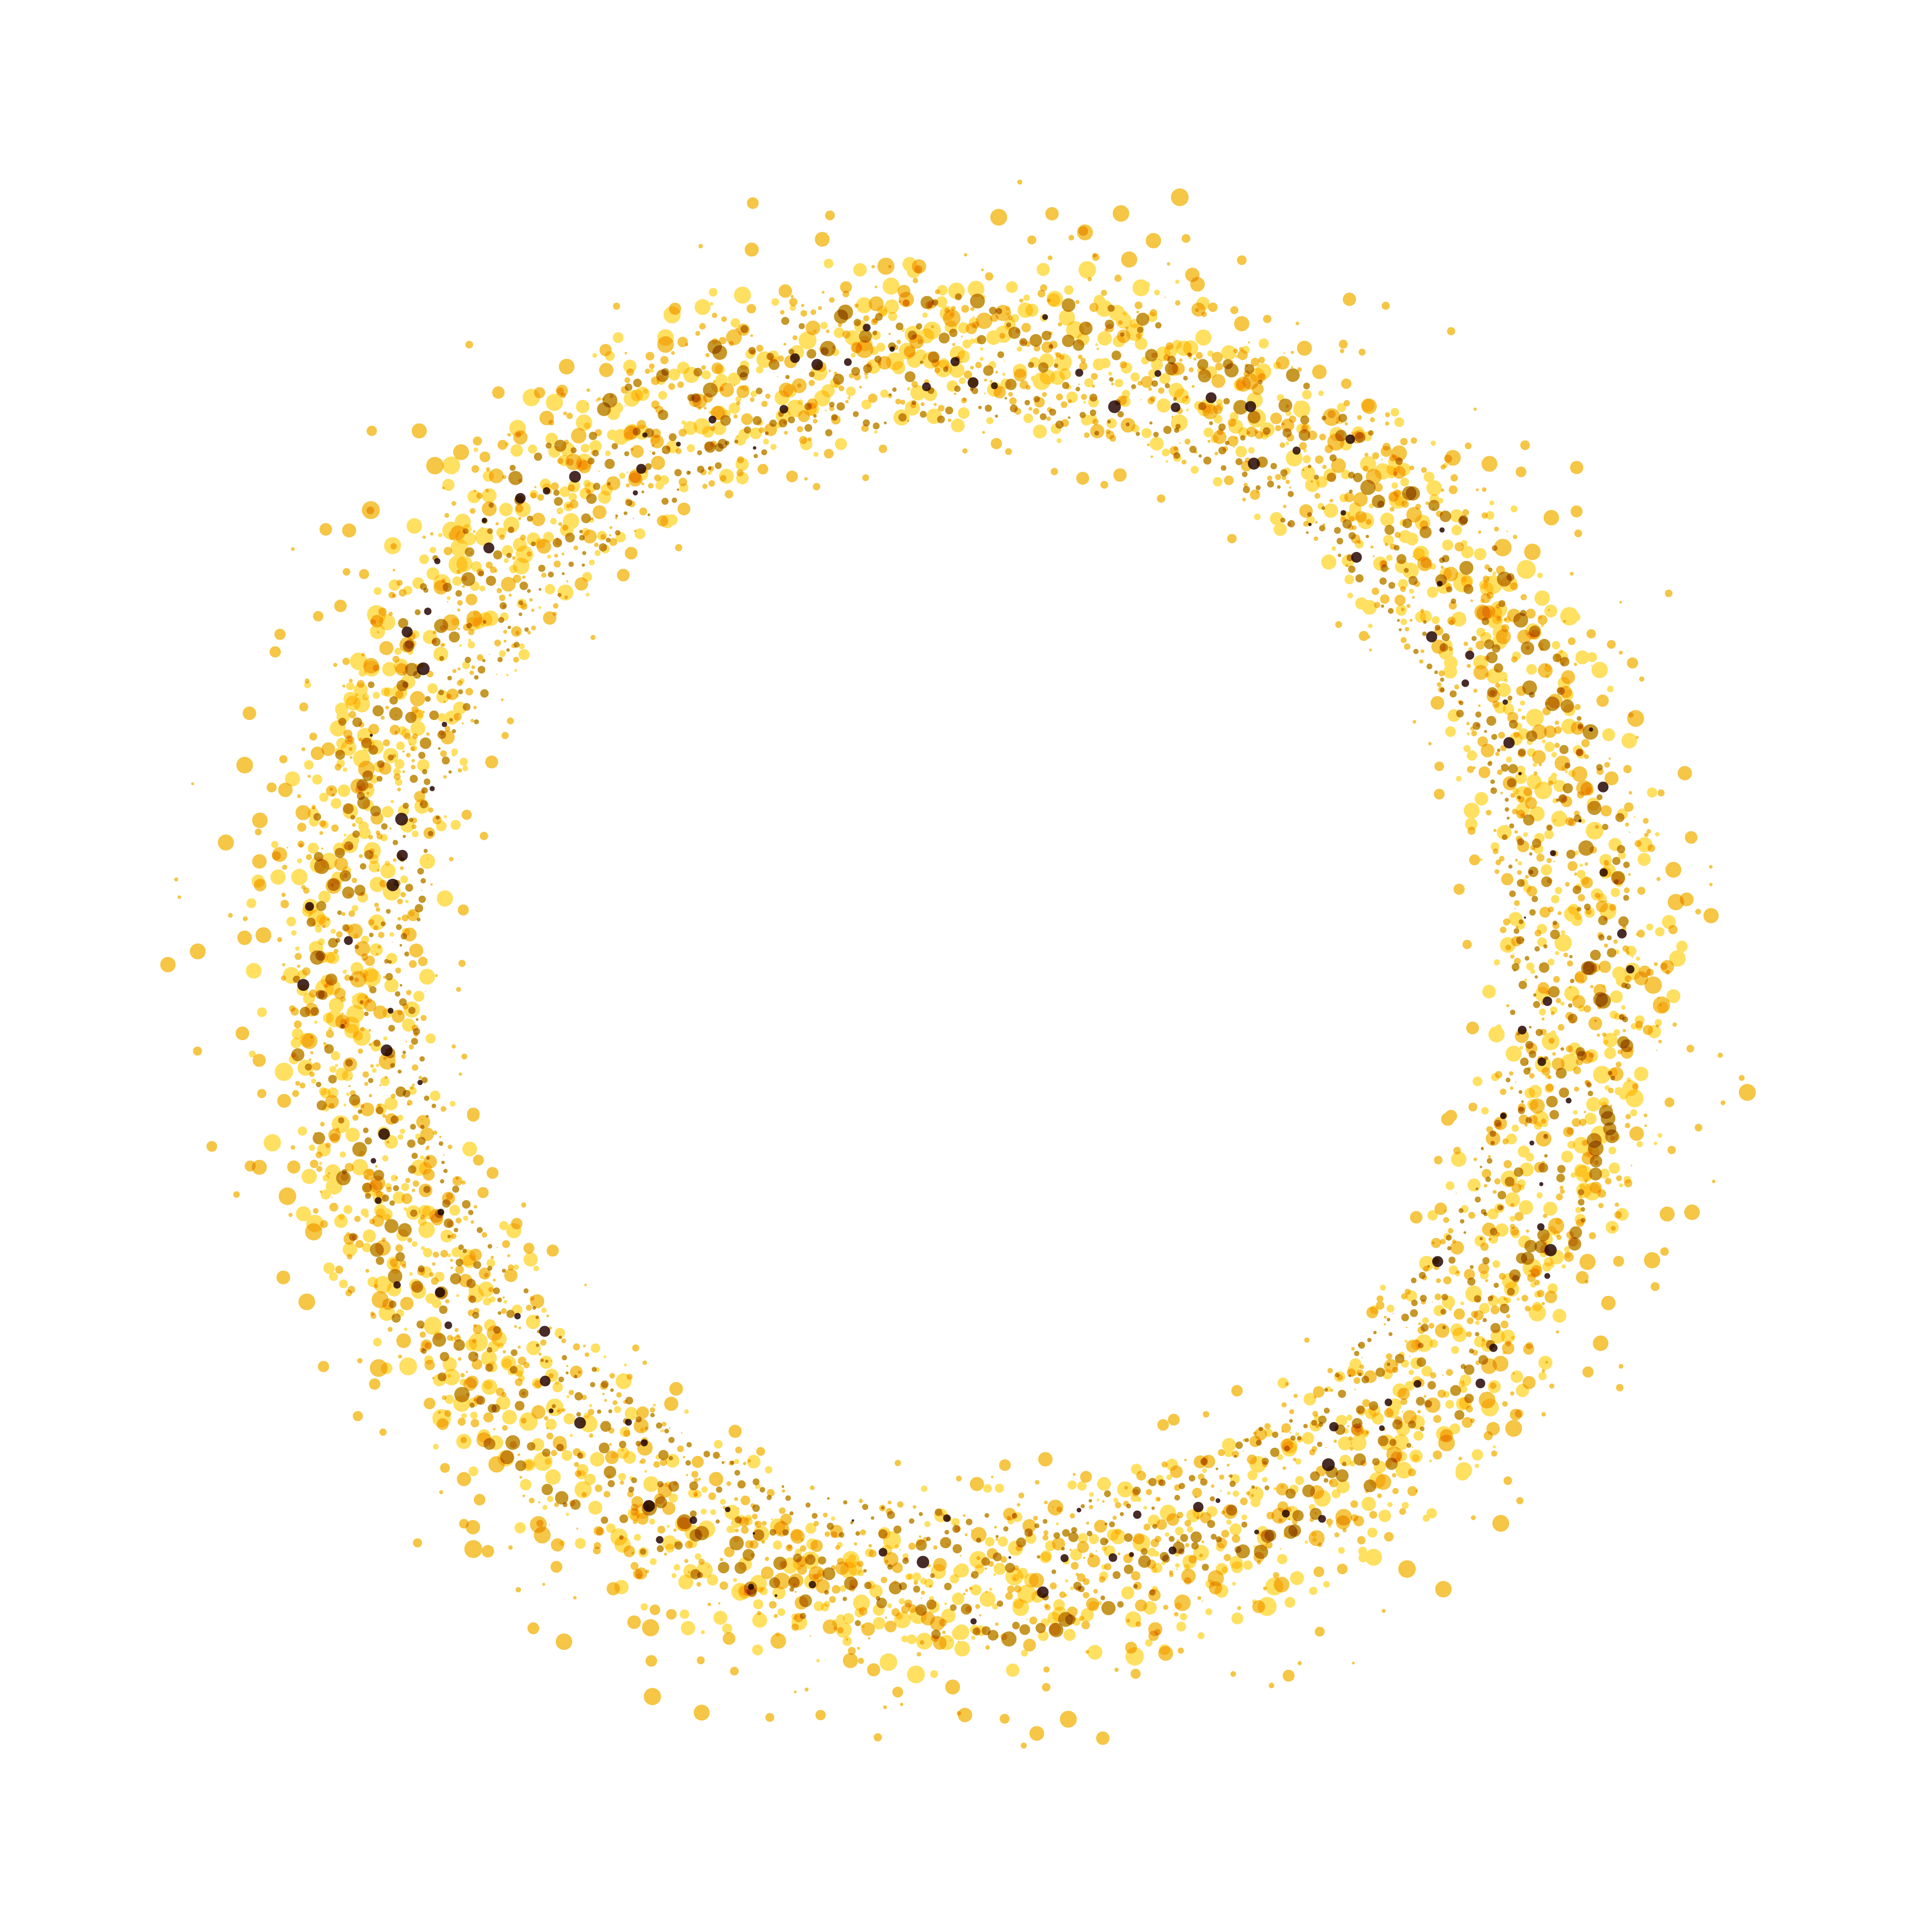 Circle Of Gold Glitter With Small Particles Abstract Background With